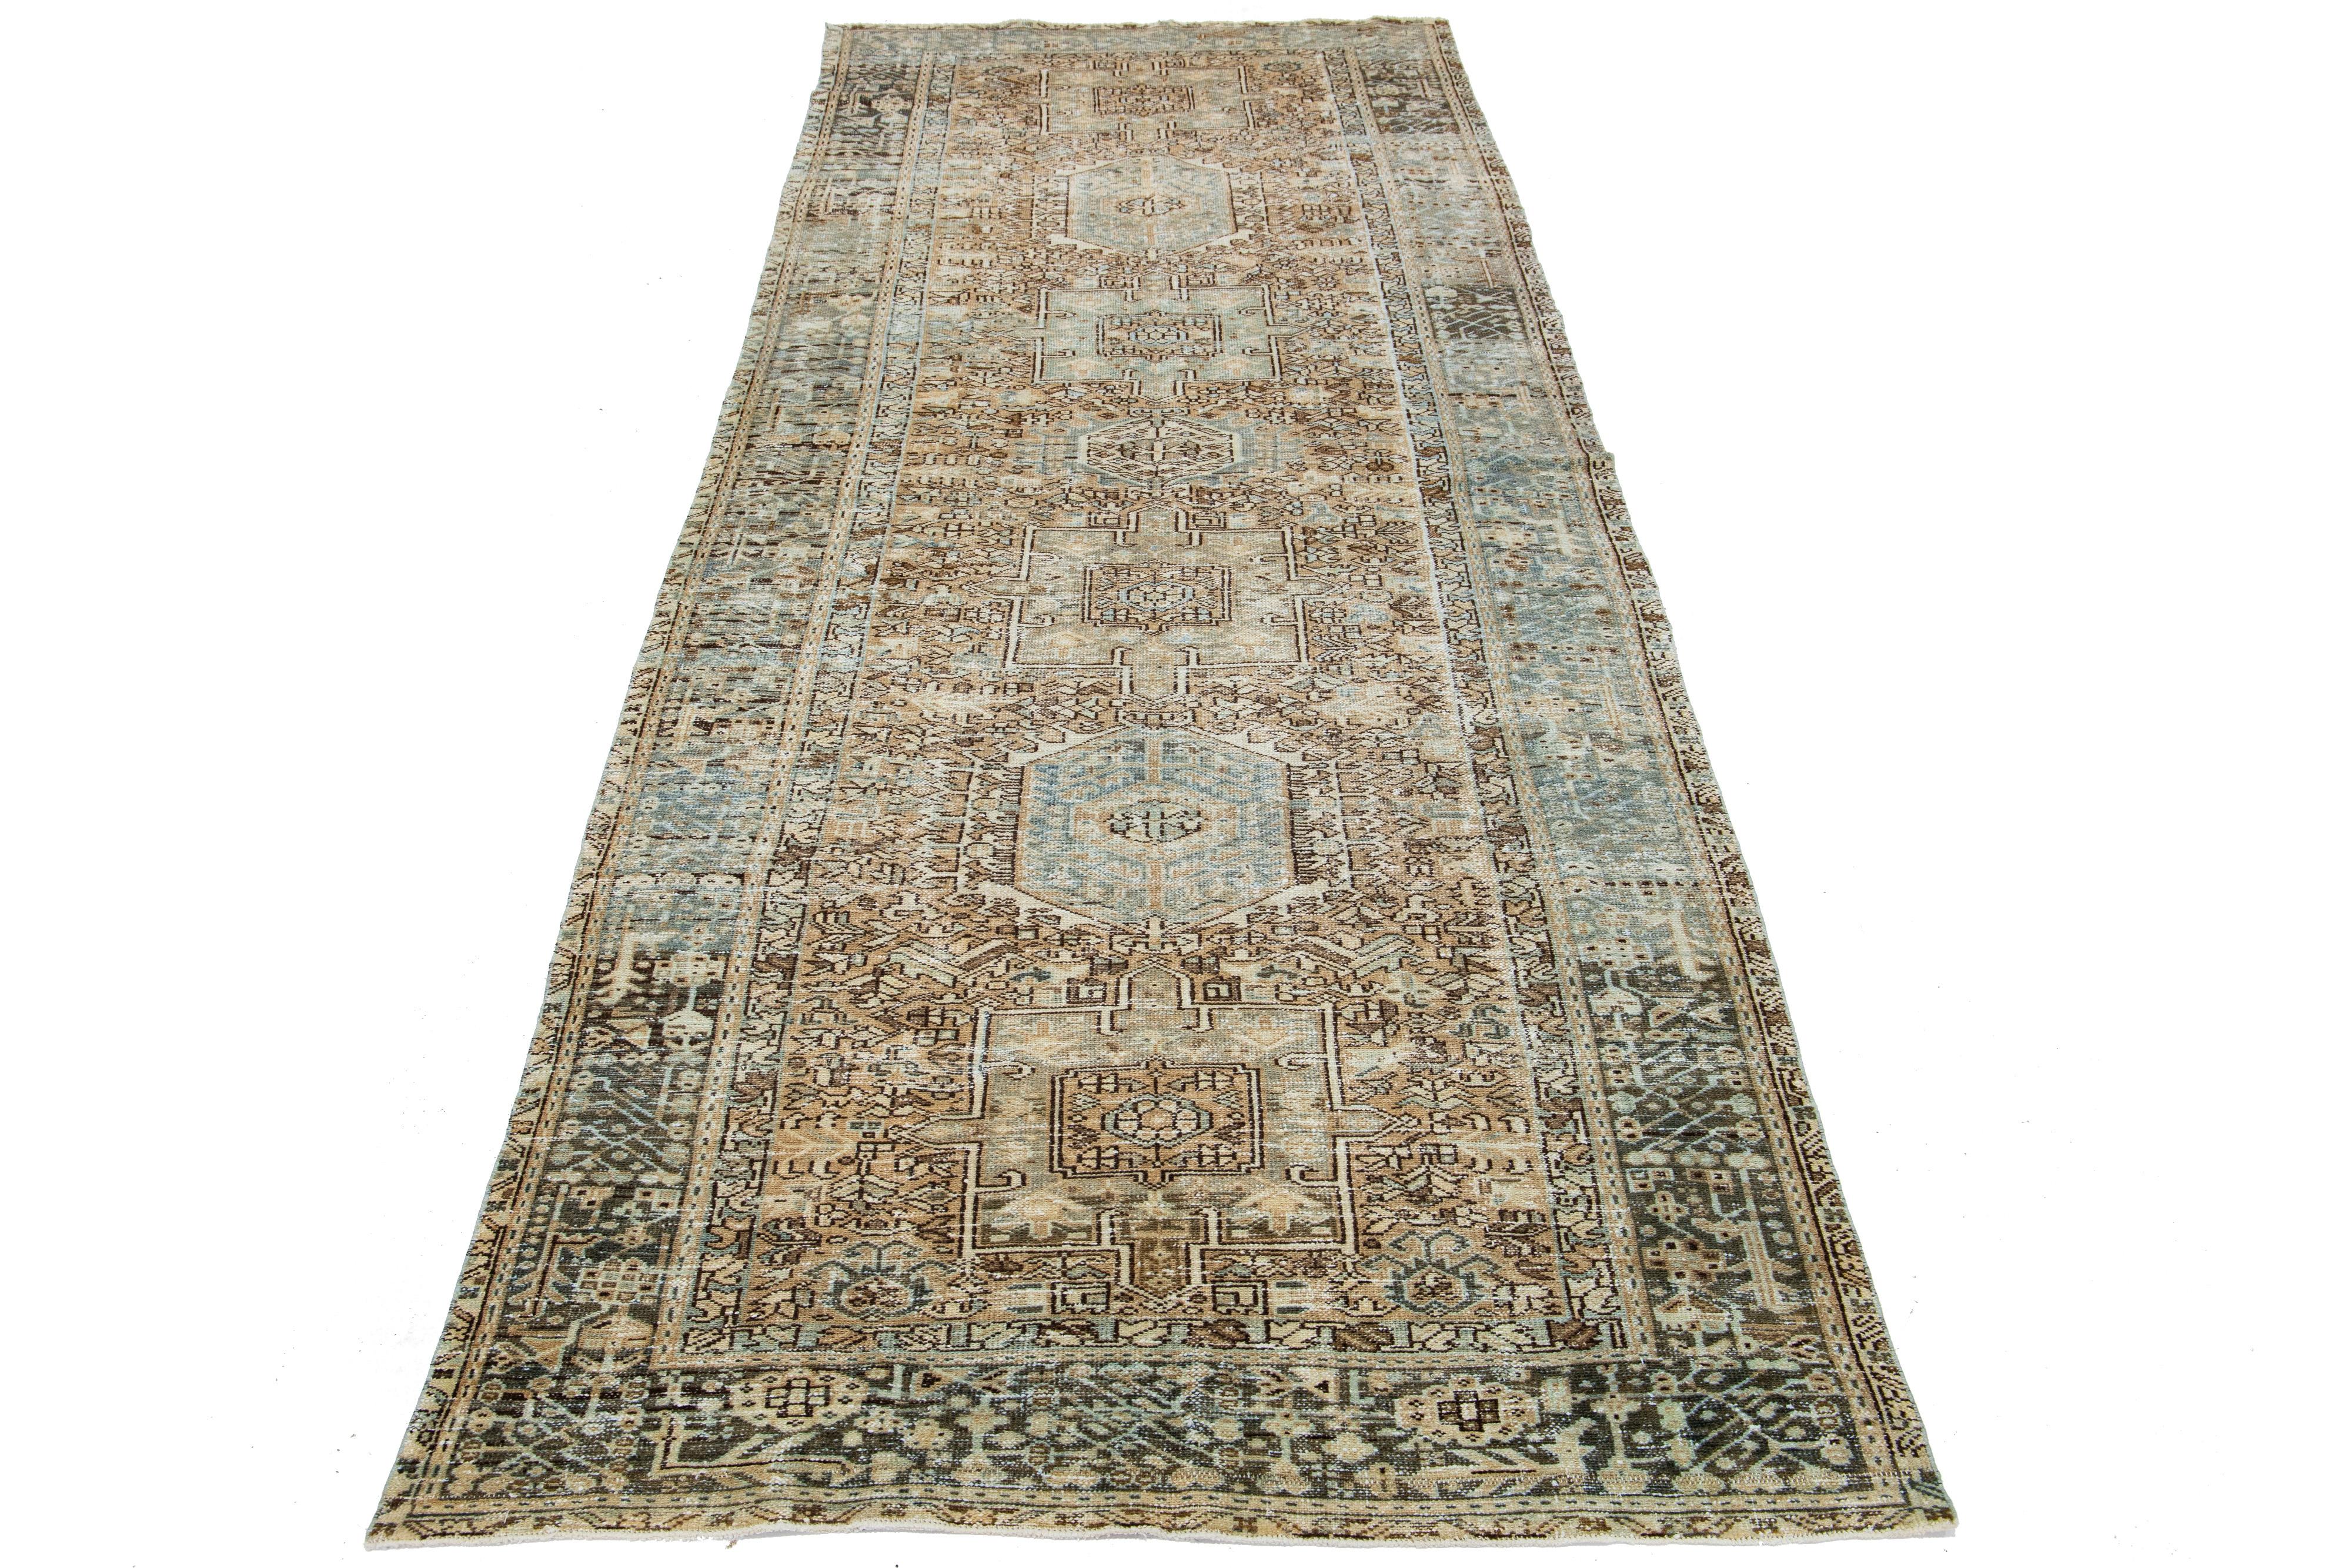 Beautiful 20th-century Heriz hand-knotted wool runner with a brown color field. This Piece has blue accents in a gorgeous tribal design.

This rug measures 4'8